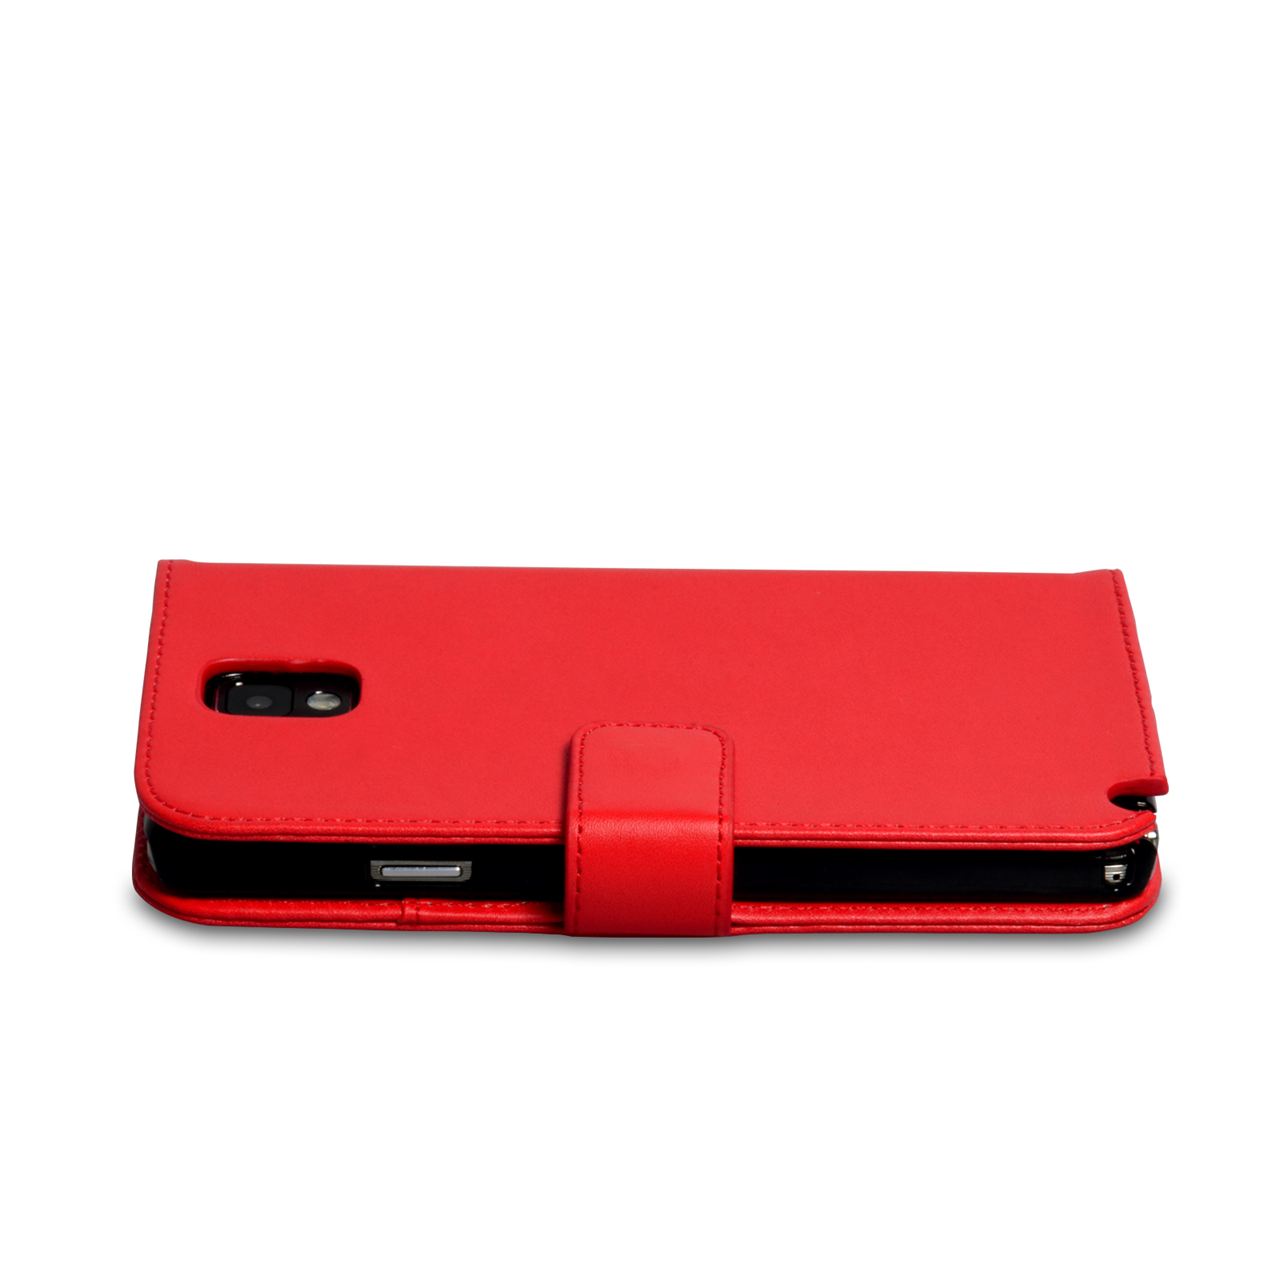 YouSave Samsung Galaxy Note 3 Leather Effect Wallet Case - Red